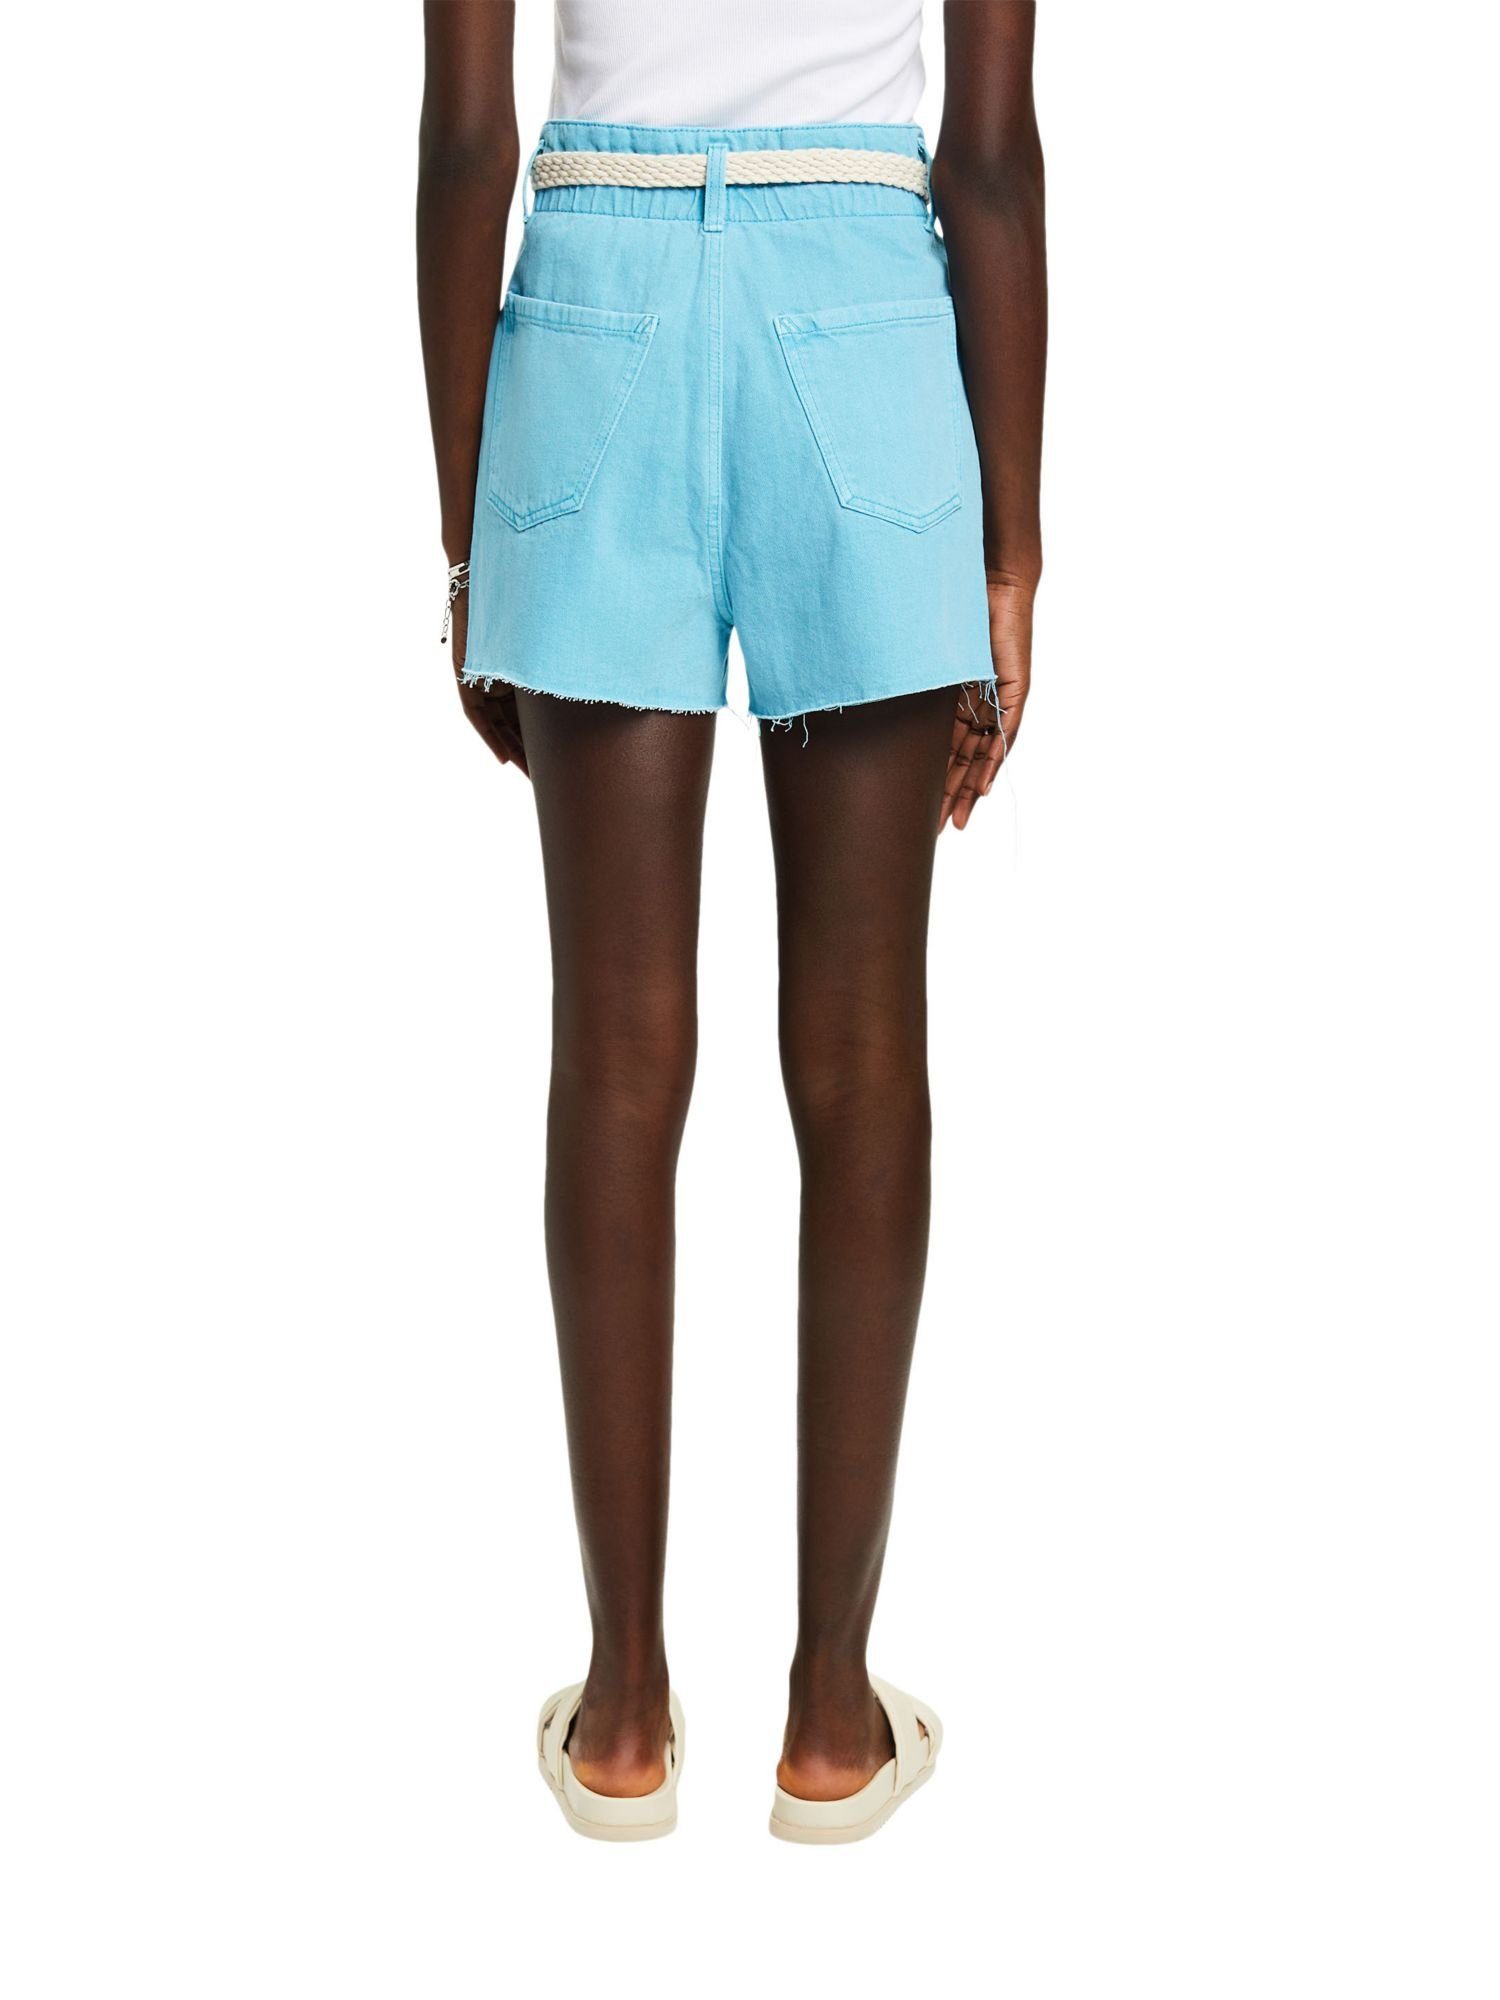 in edc Jeansshorts abgeschnittener TURQUOISE Optik by (1-tlg) Esprit Shorts